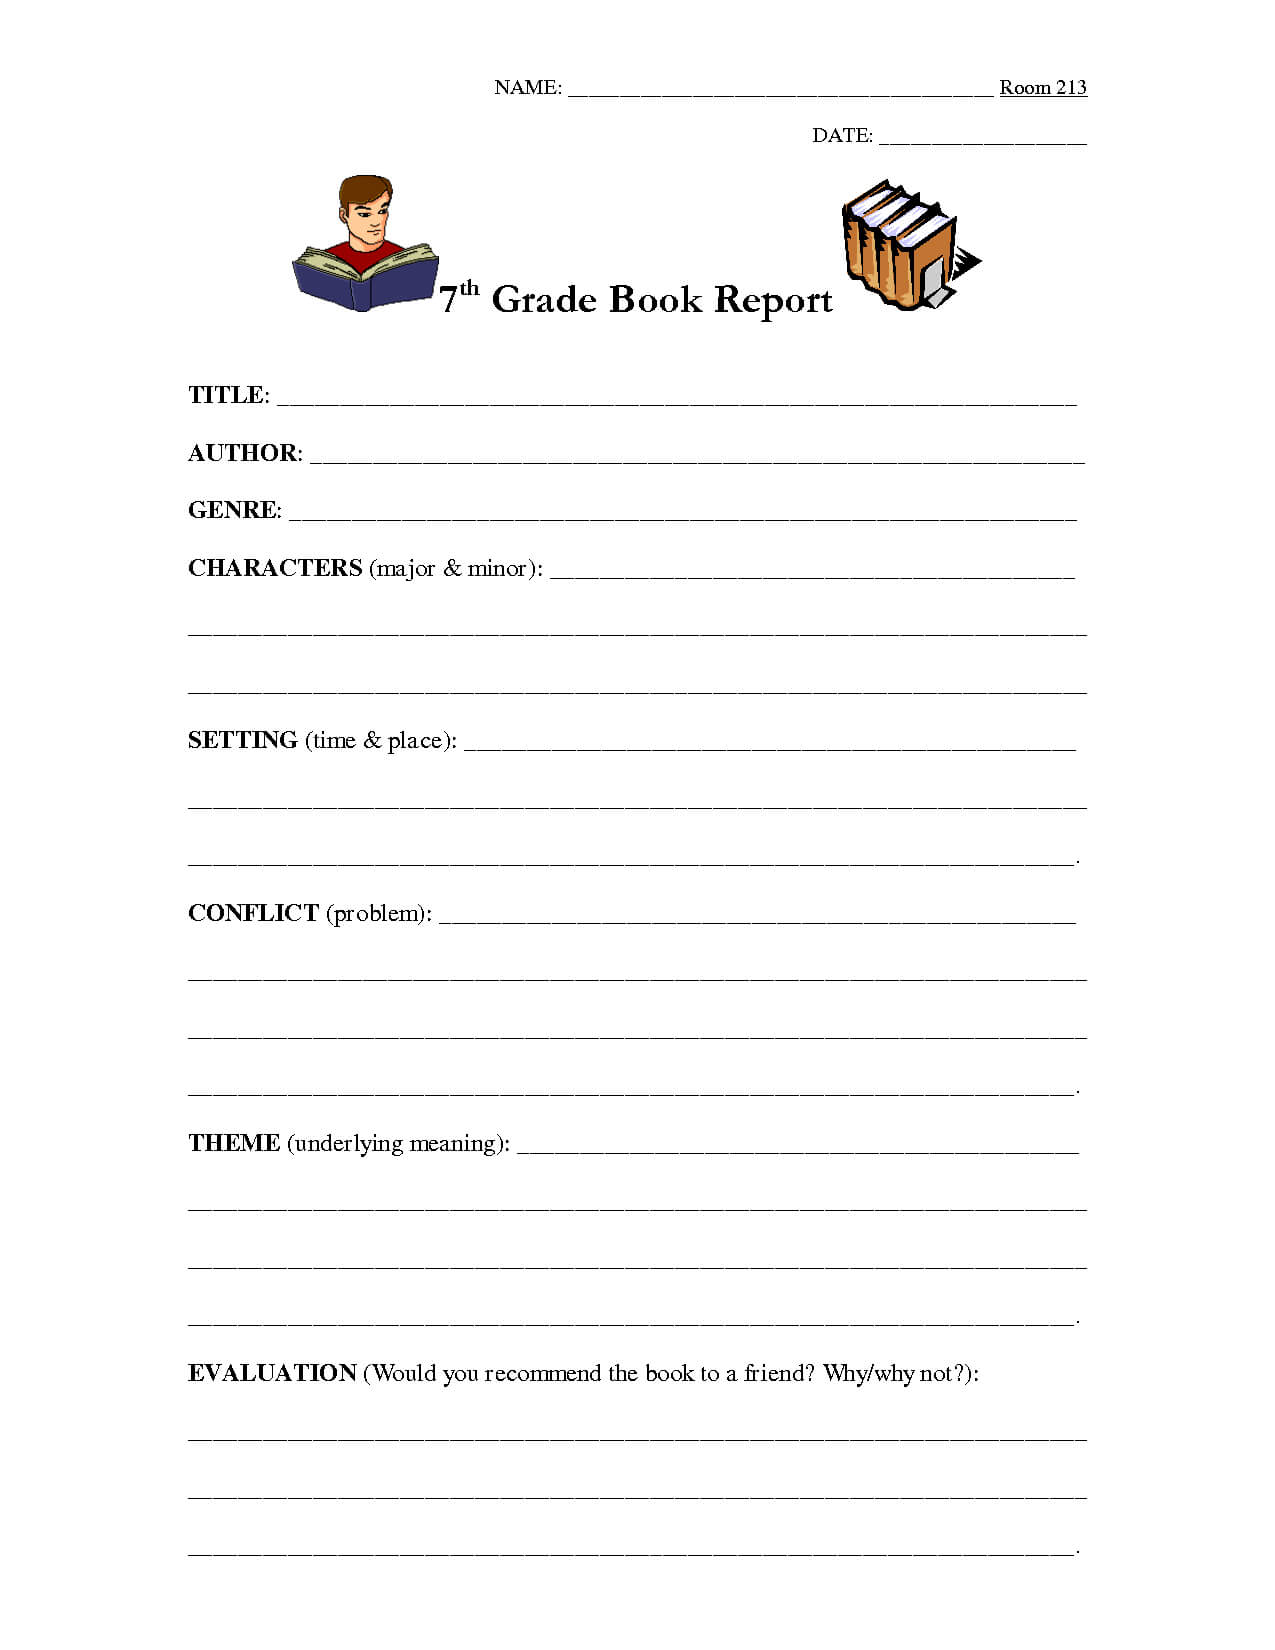 7Th Grade Book Report Outline | Education | Book Report Intended For Student Grade Report Template